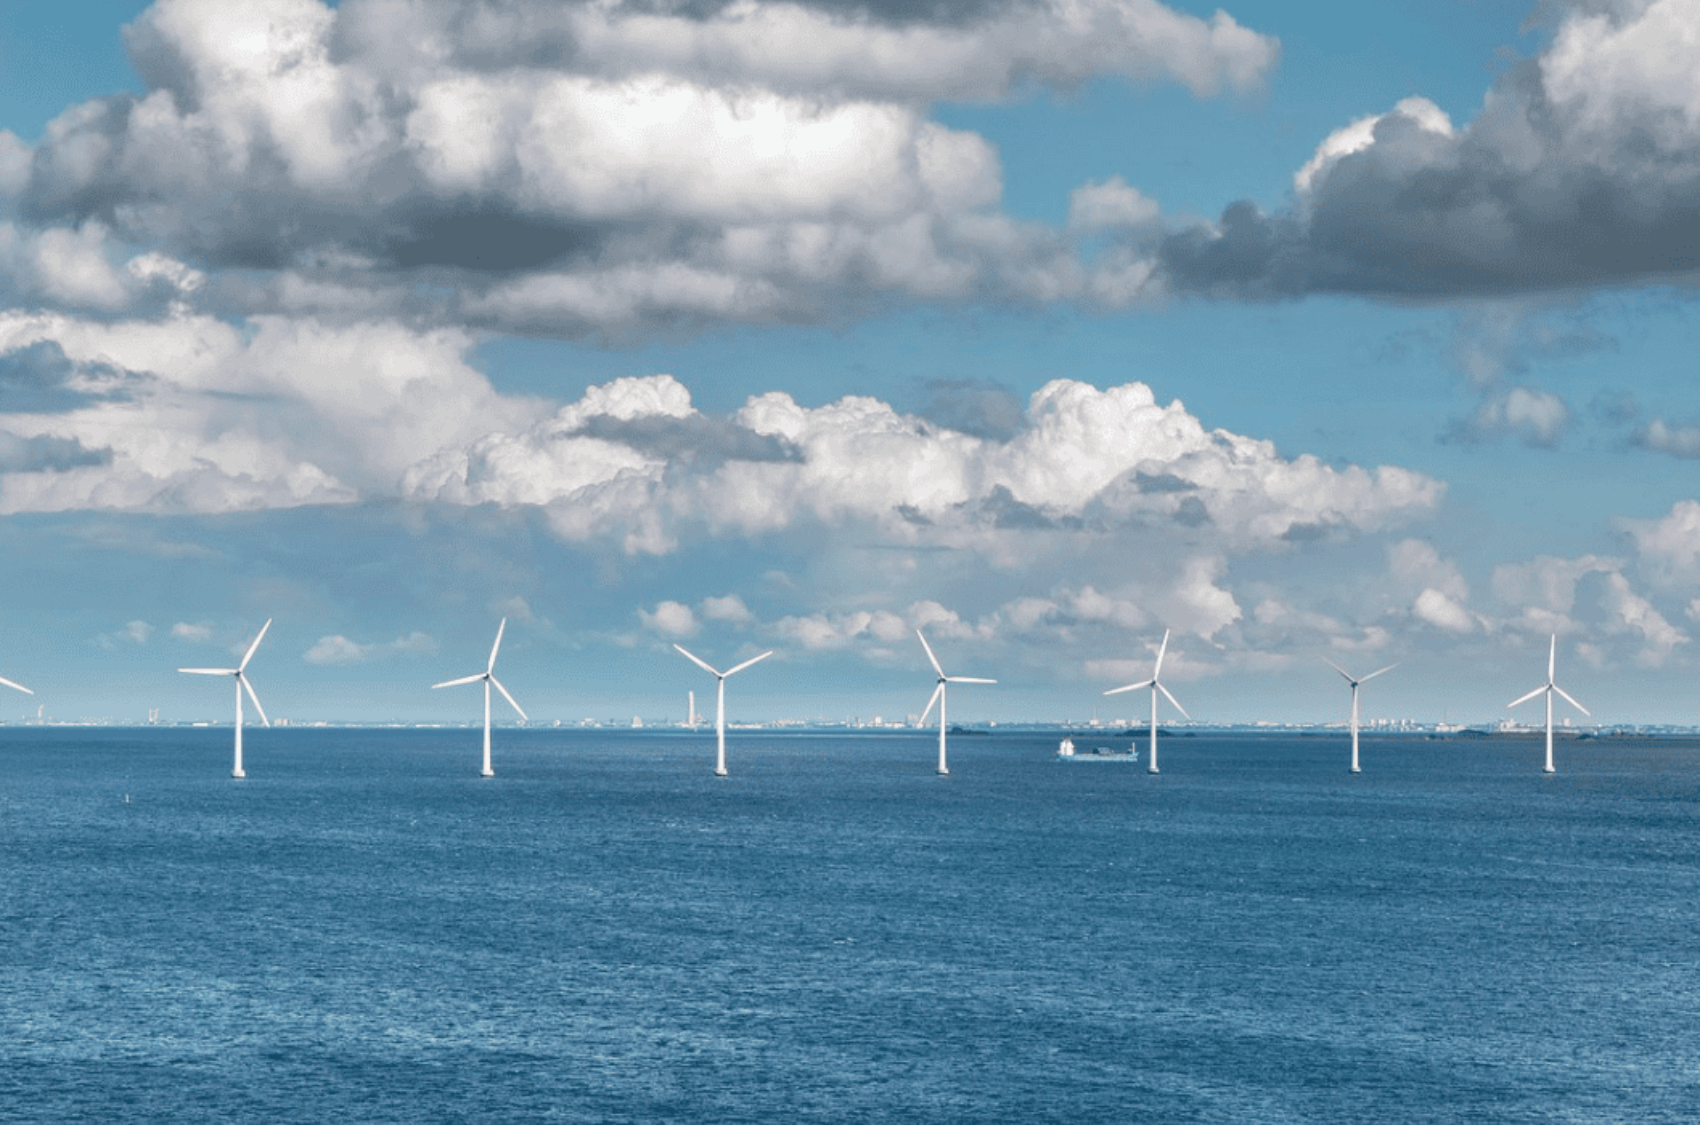 Hornsea Wind Farm is now one of the largest renewable energy sites in the world